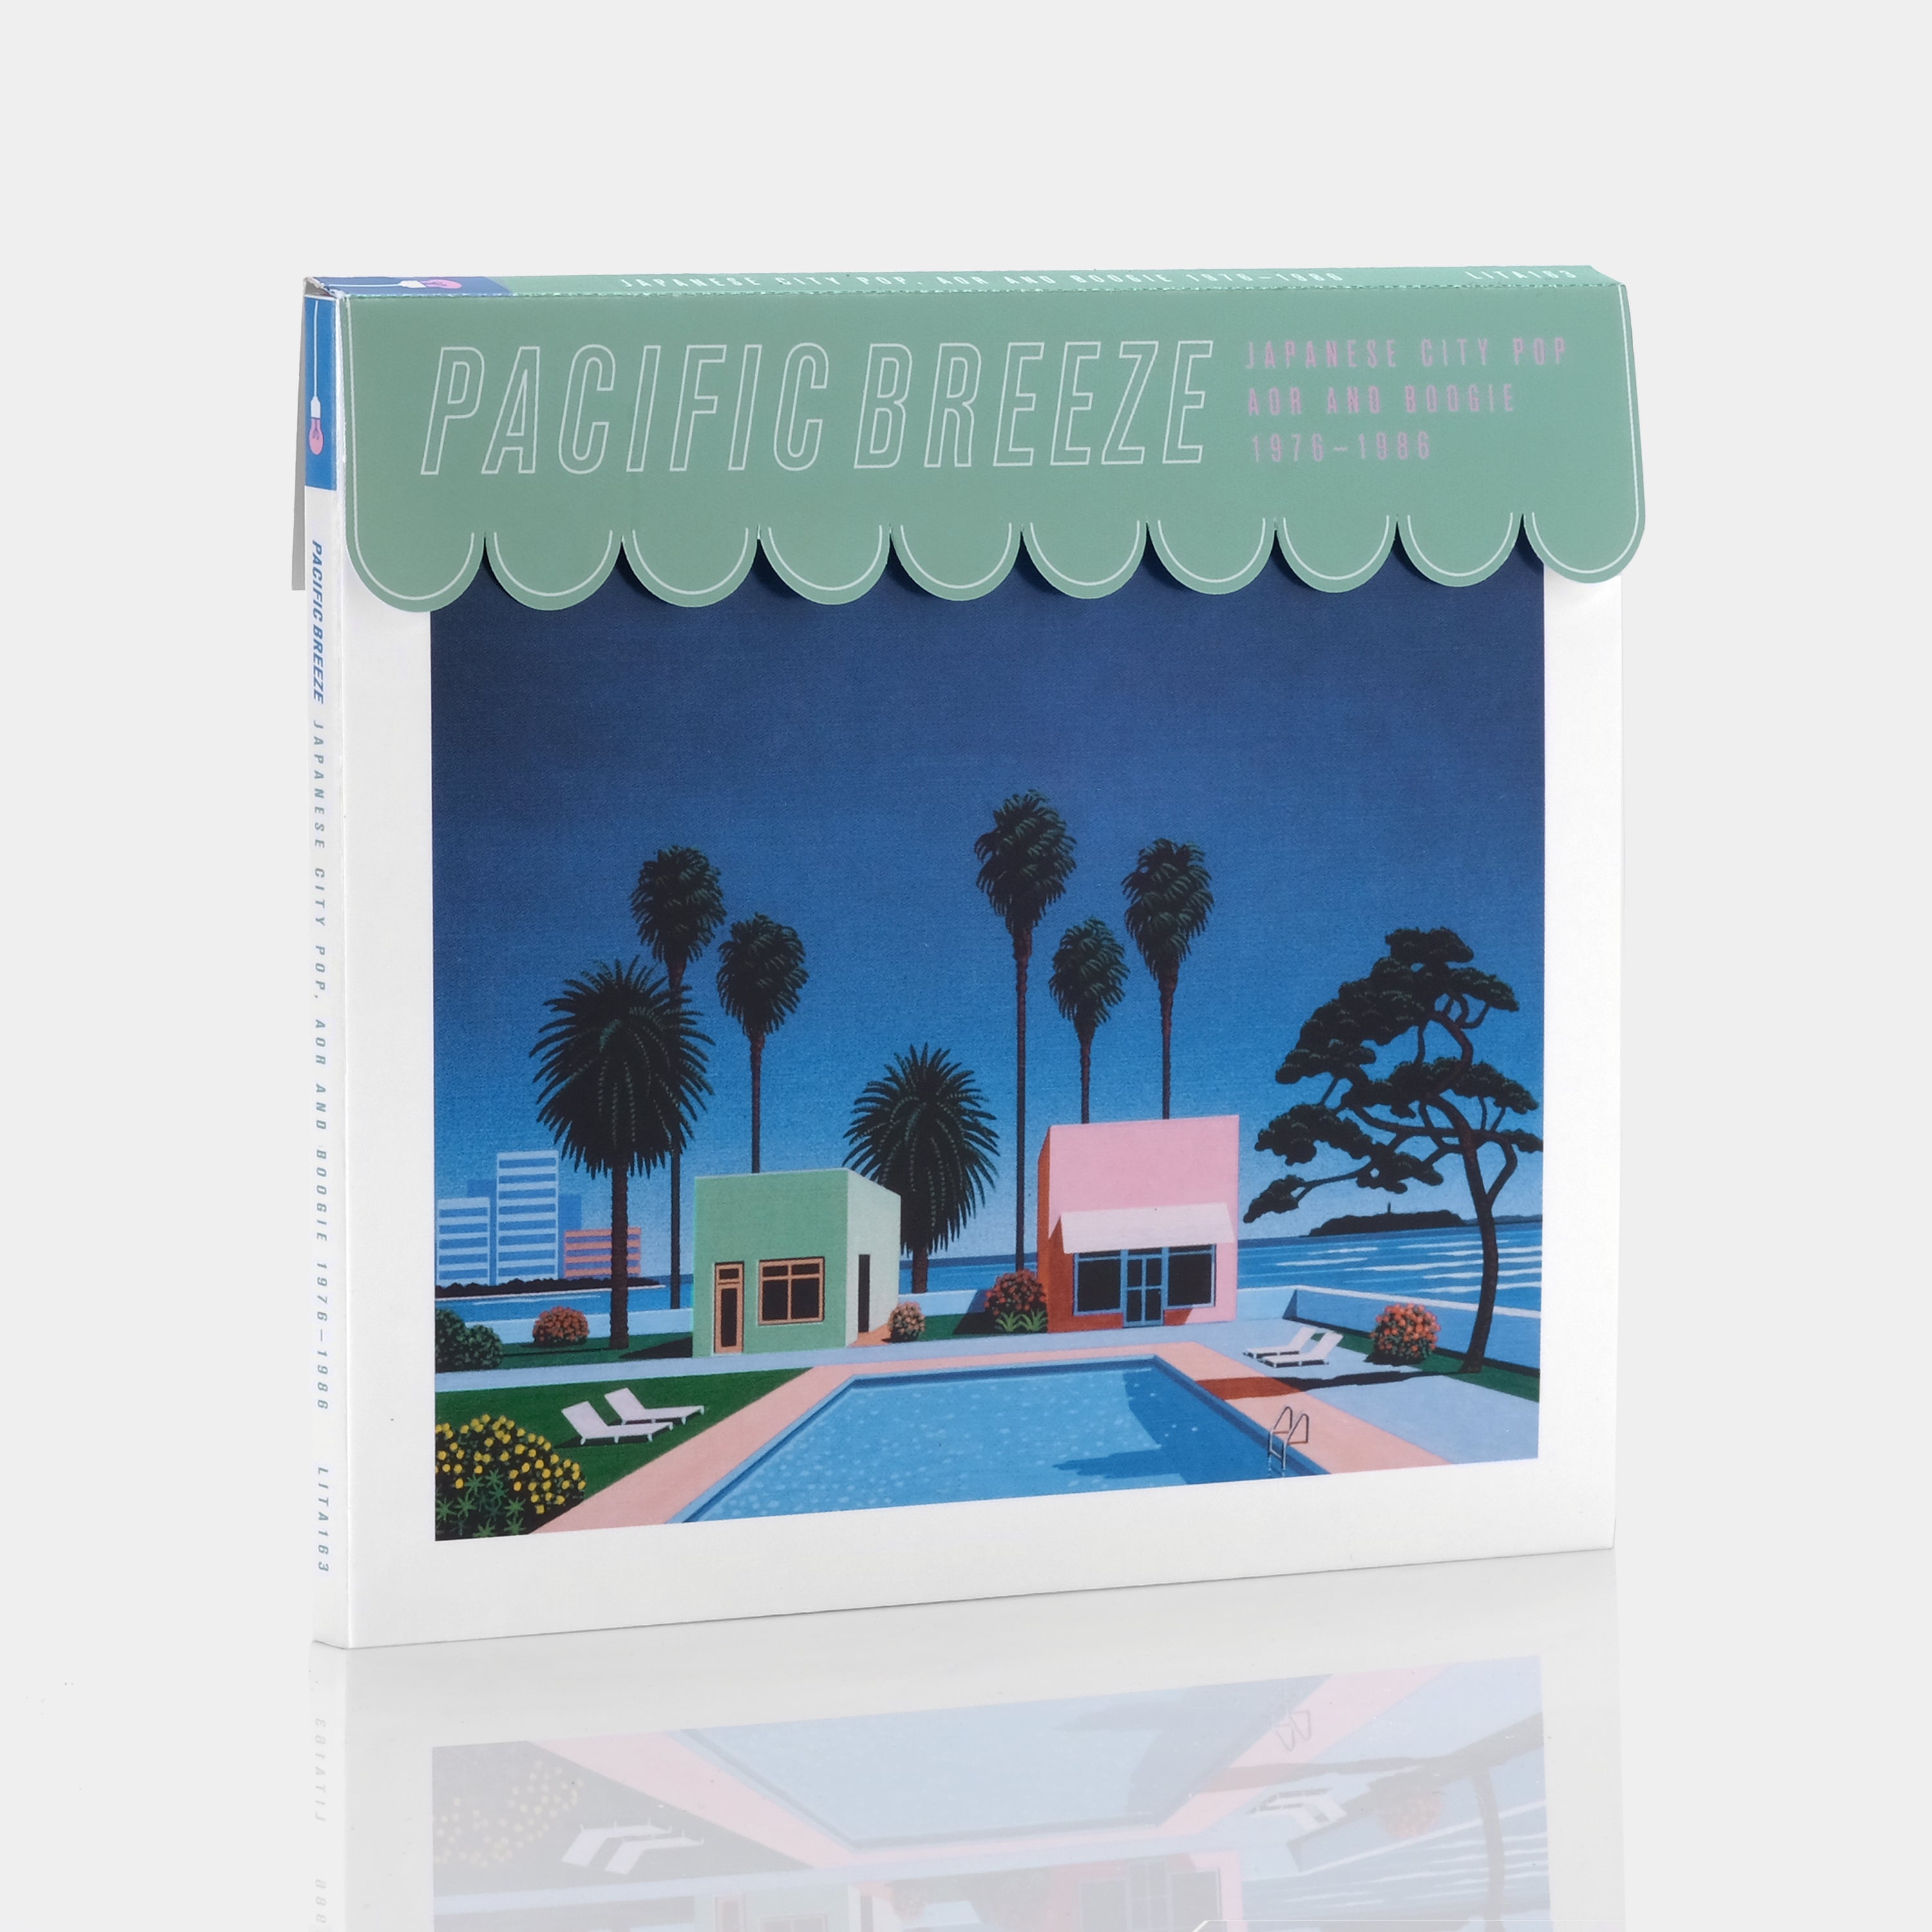 Pacific Breeze: Japanese City Pop, AOR And Boogie 1976-1986 CD